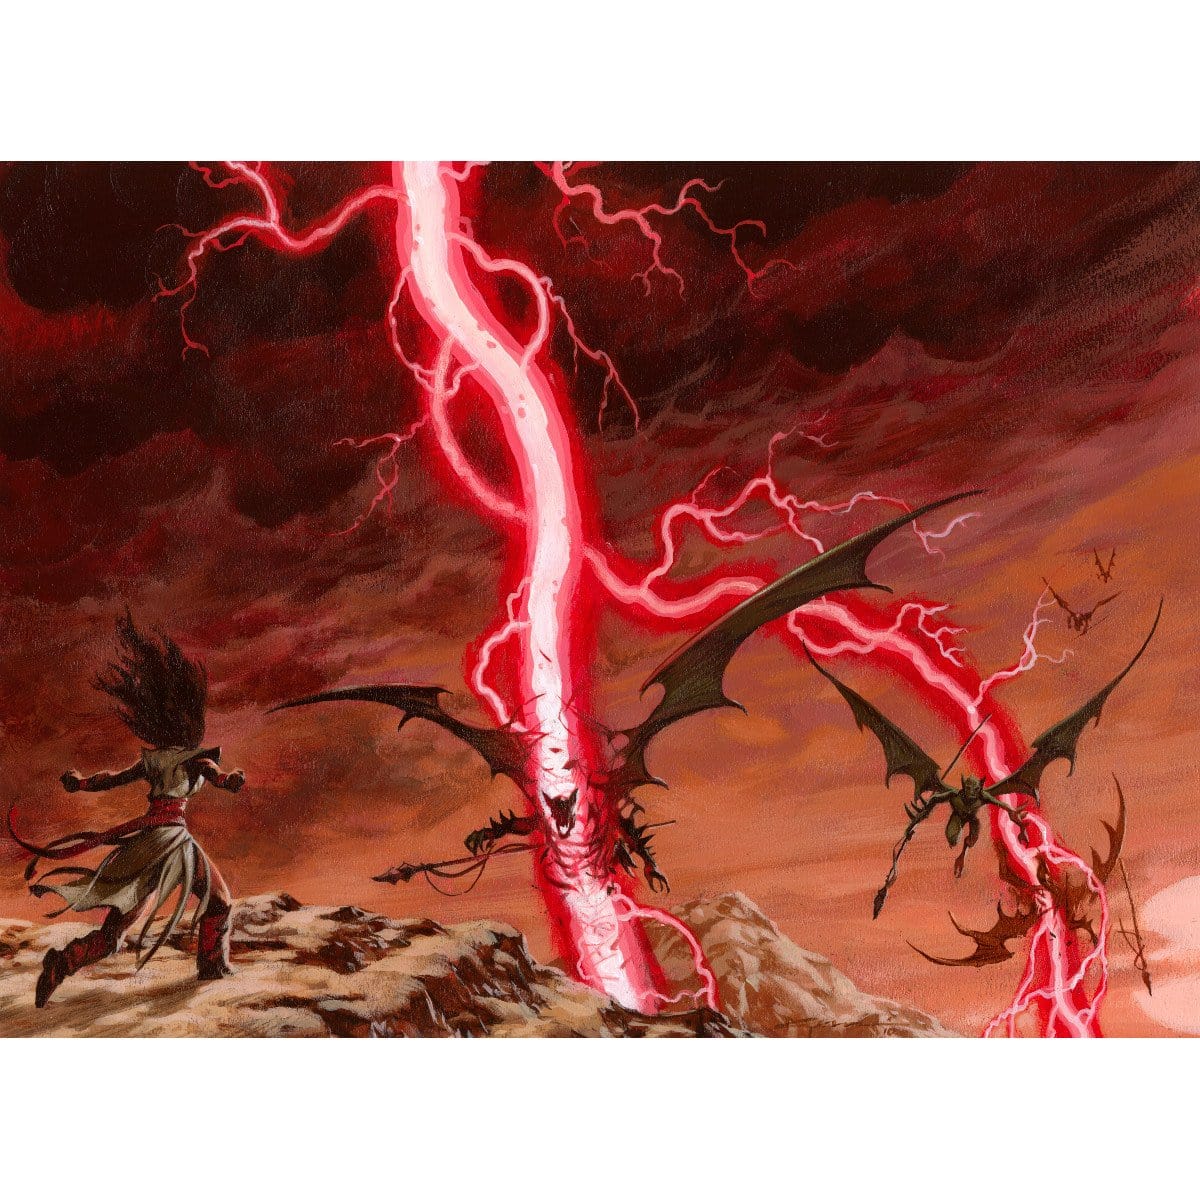 Chain Lightning Print - Print - Original Magic Art - Accessories for Magic the Gathering and other card games